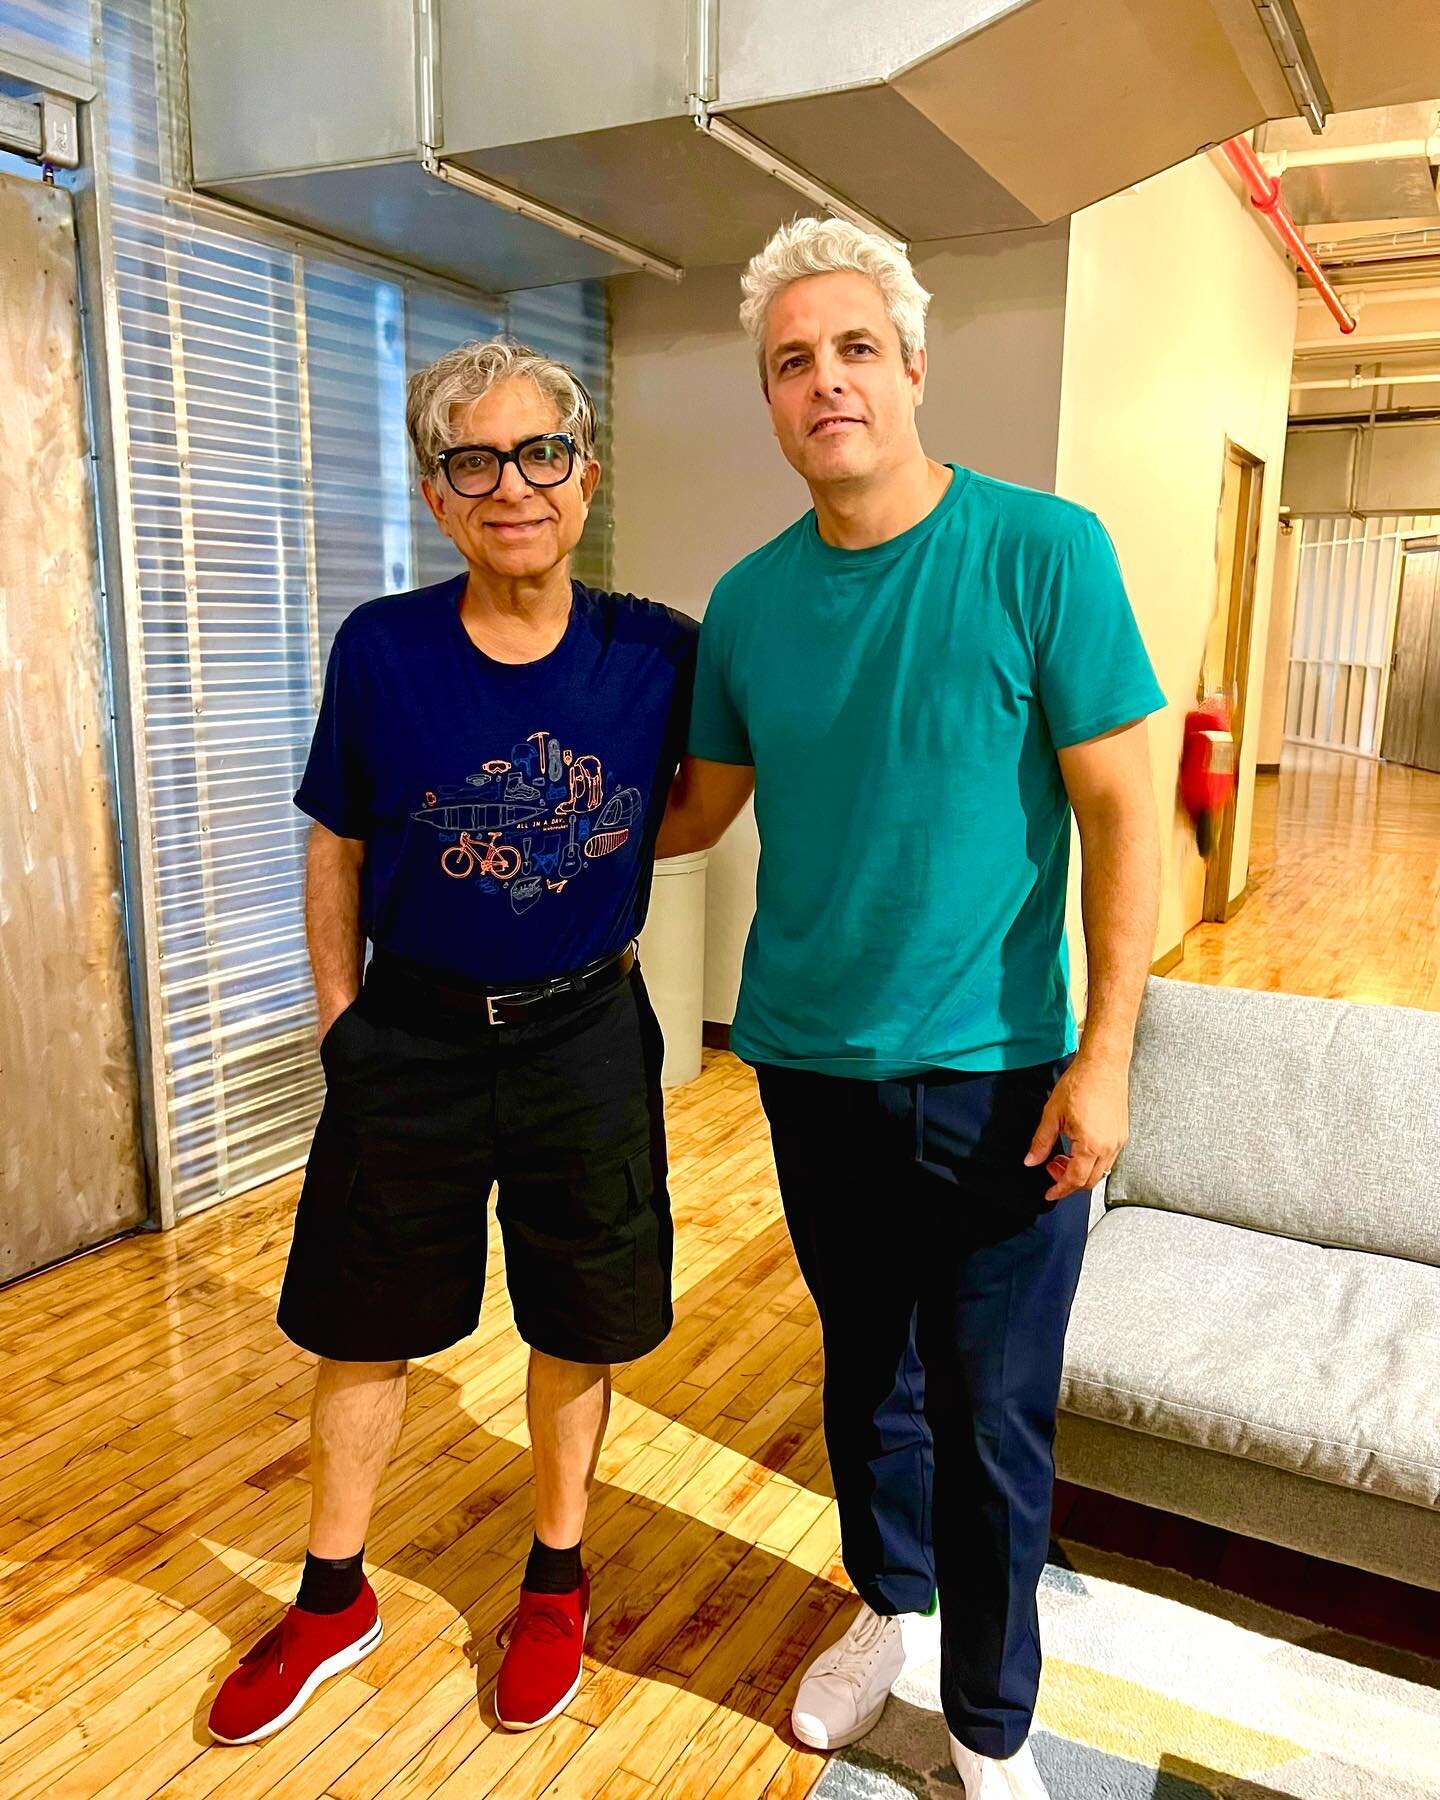 In studio with Deepak, new content coming soon 💫🙏 #consciousness #chopra